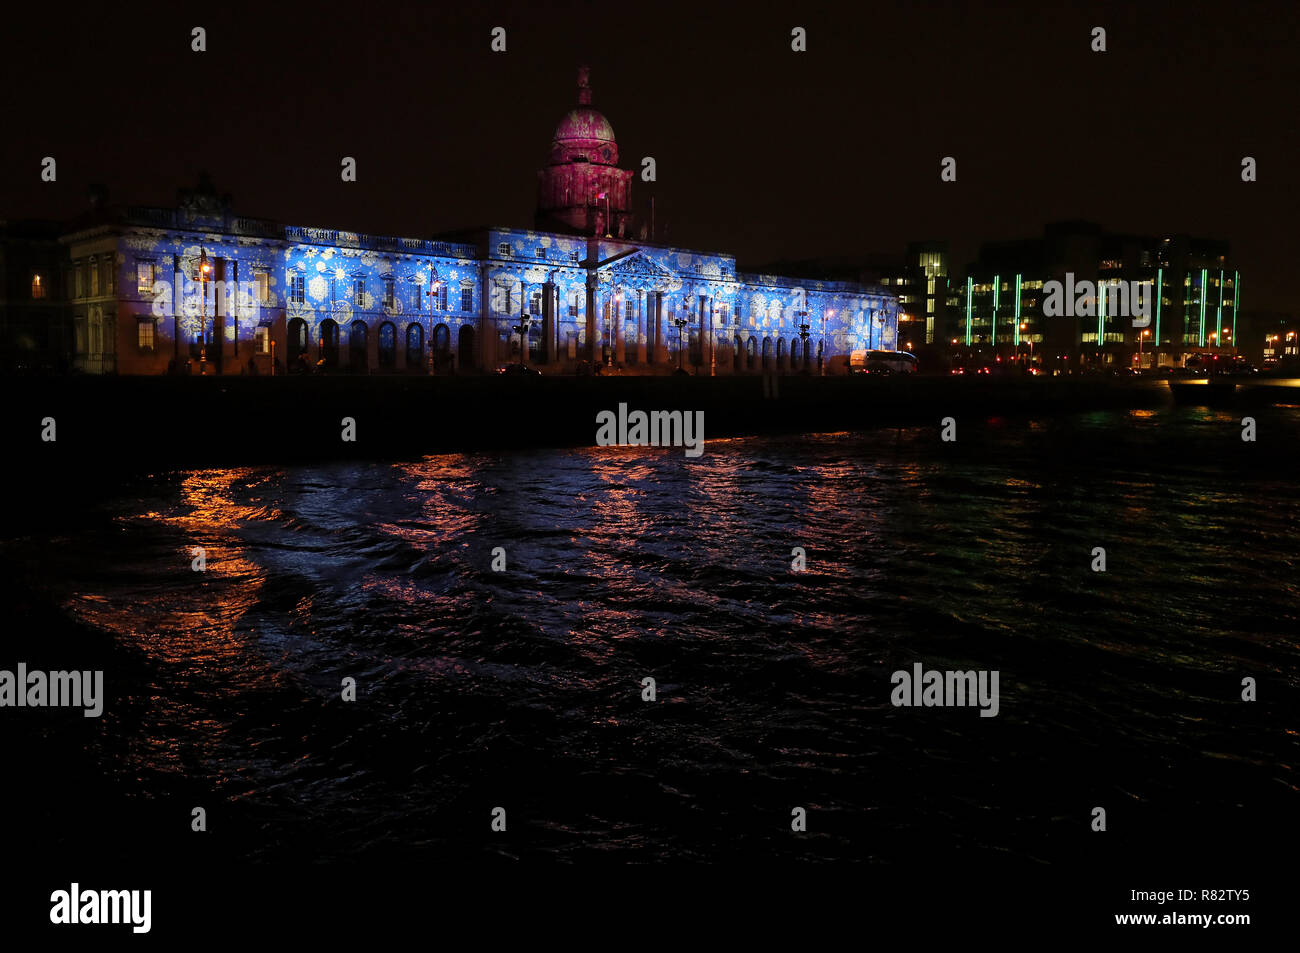 The Customs House which is illuminated as part of Dublin City council's ÔWinter Lights Dublin City' which features thirteen iconic sites illuminated and animated for 31 nights using customised projections. Stock Photo